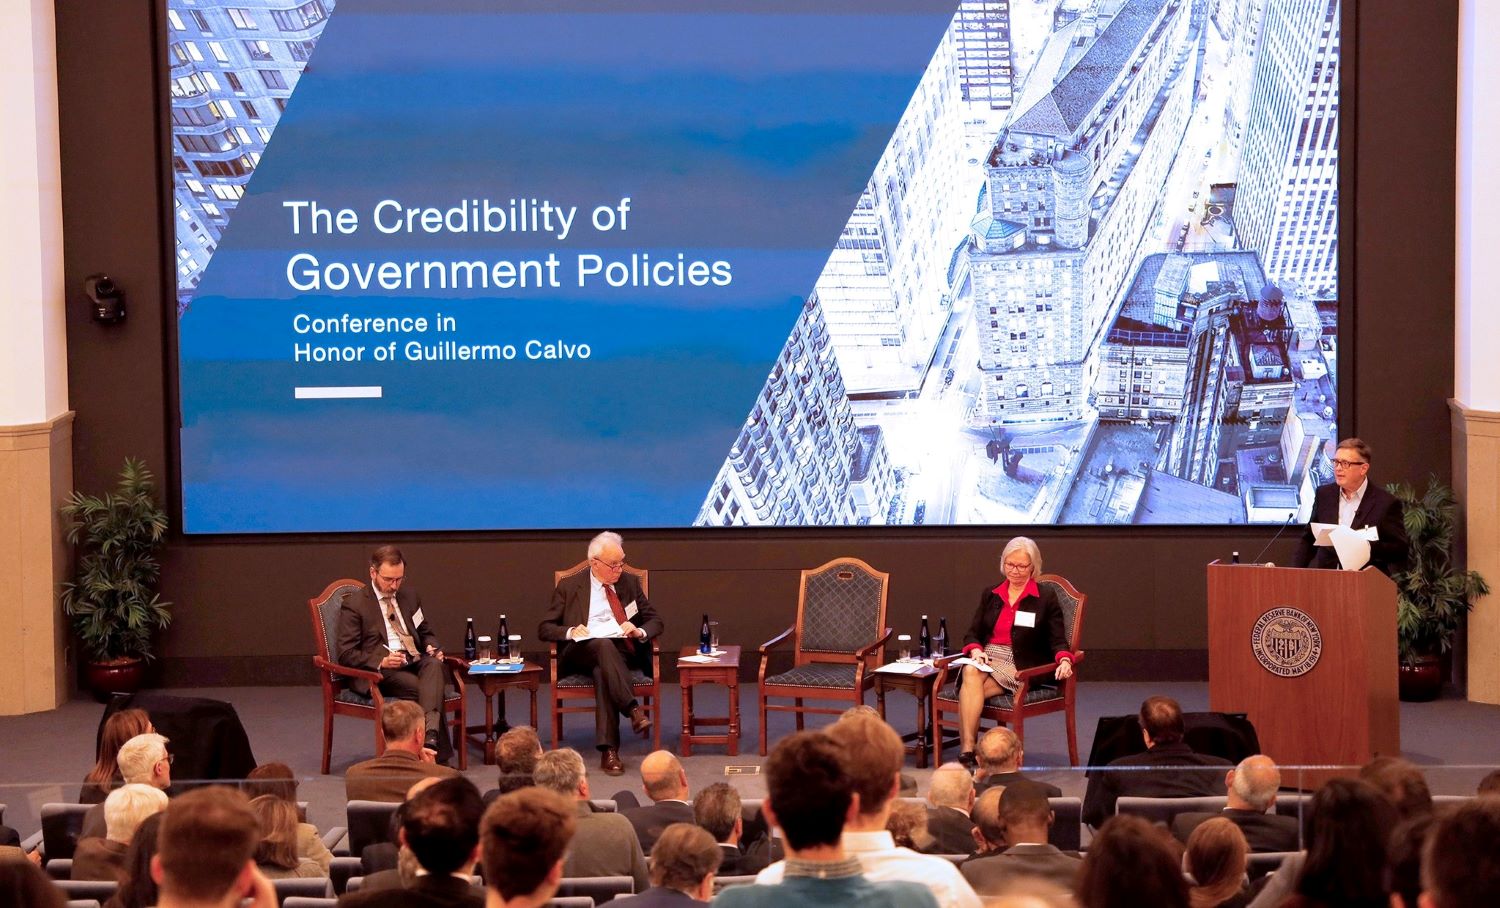 Federal Reserve Bank of New York conference on the credibility of government policies